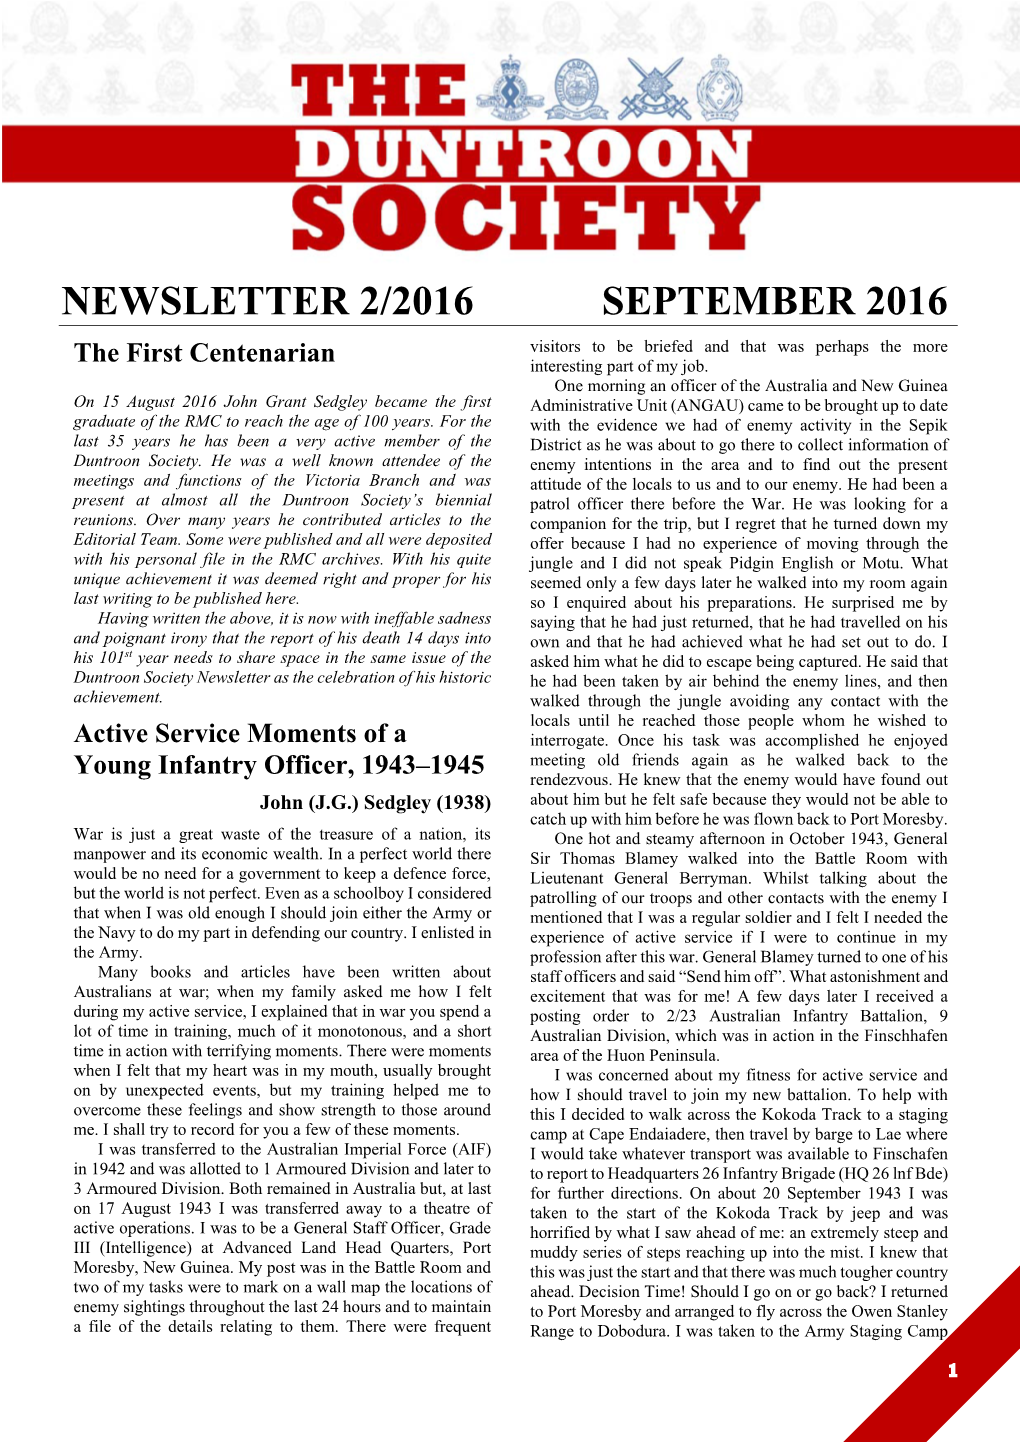 NEWSLETTER 2/2016 SEPTEMBER 2016 Visitors to Be Briefed and That Was Perhaps the More the First Centenarian Interesting Part of My Job